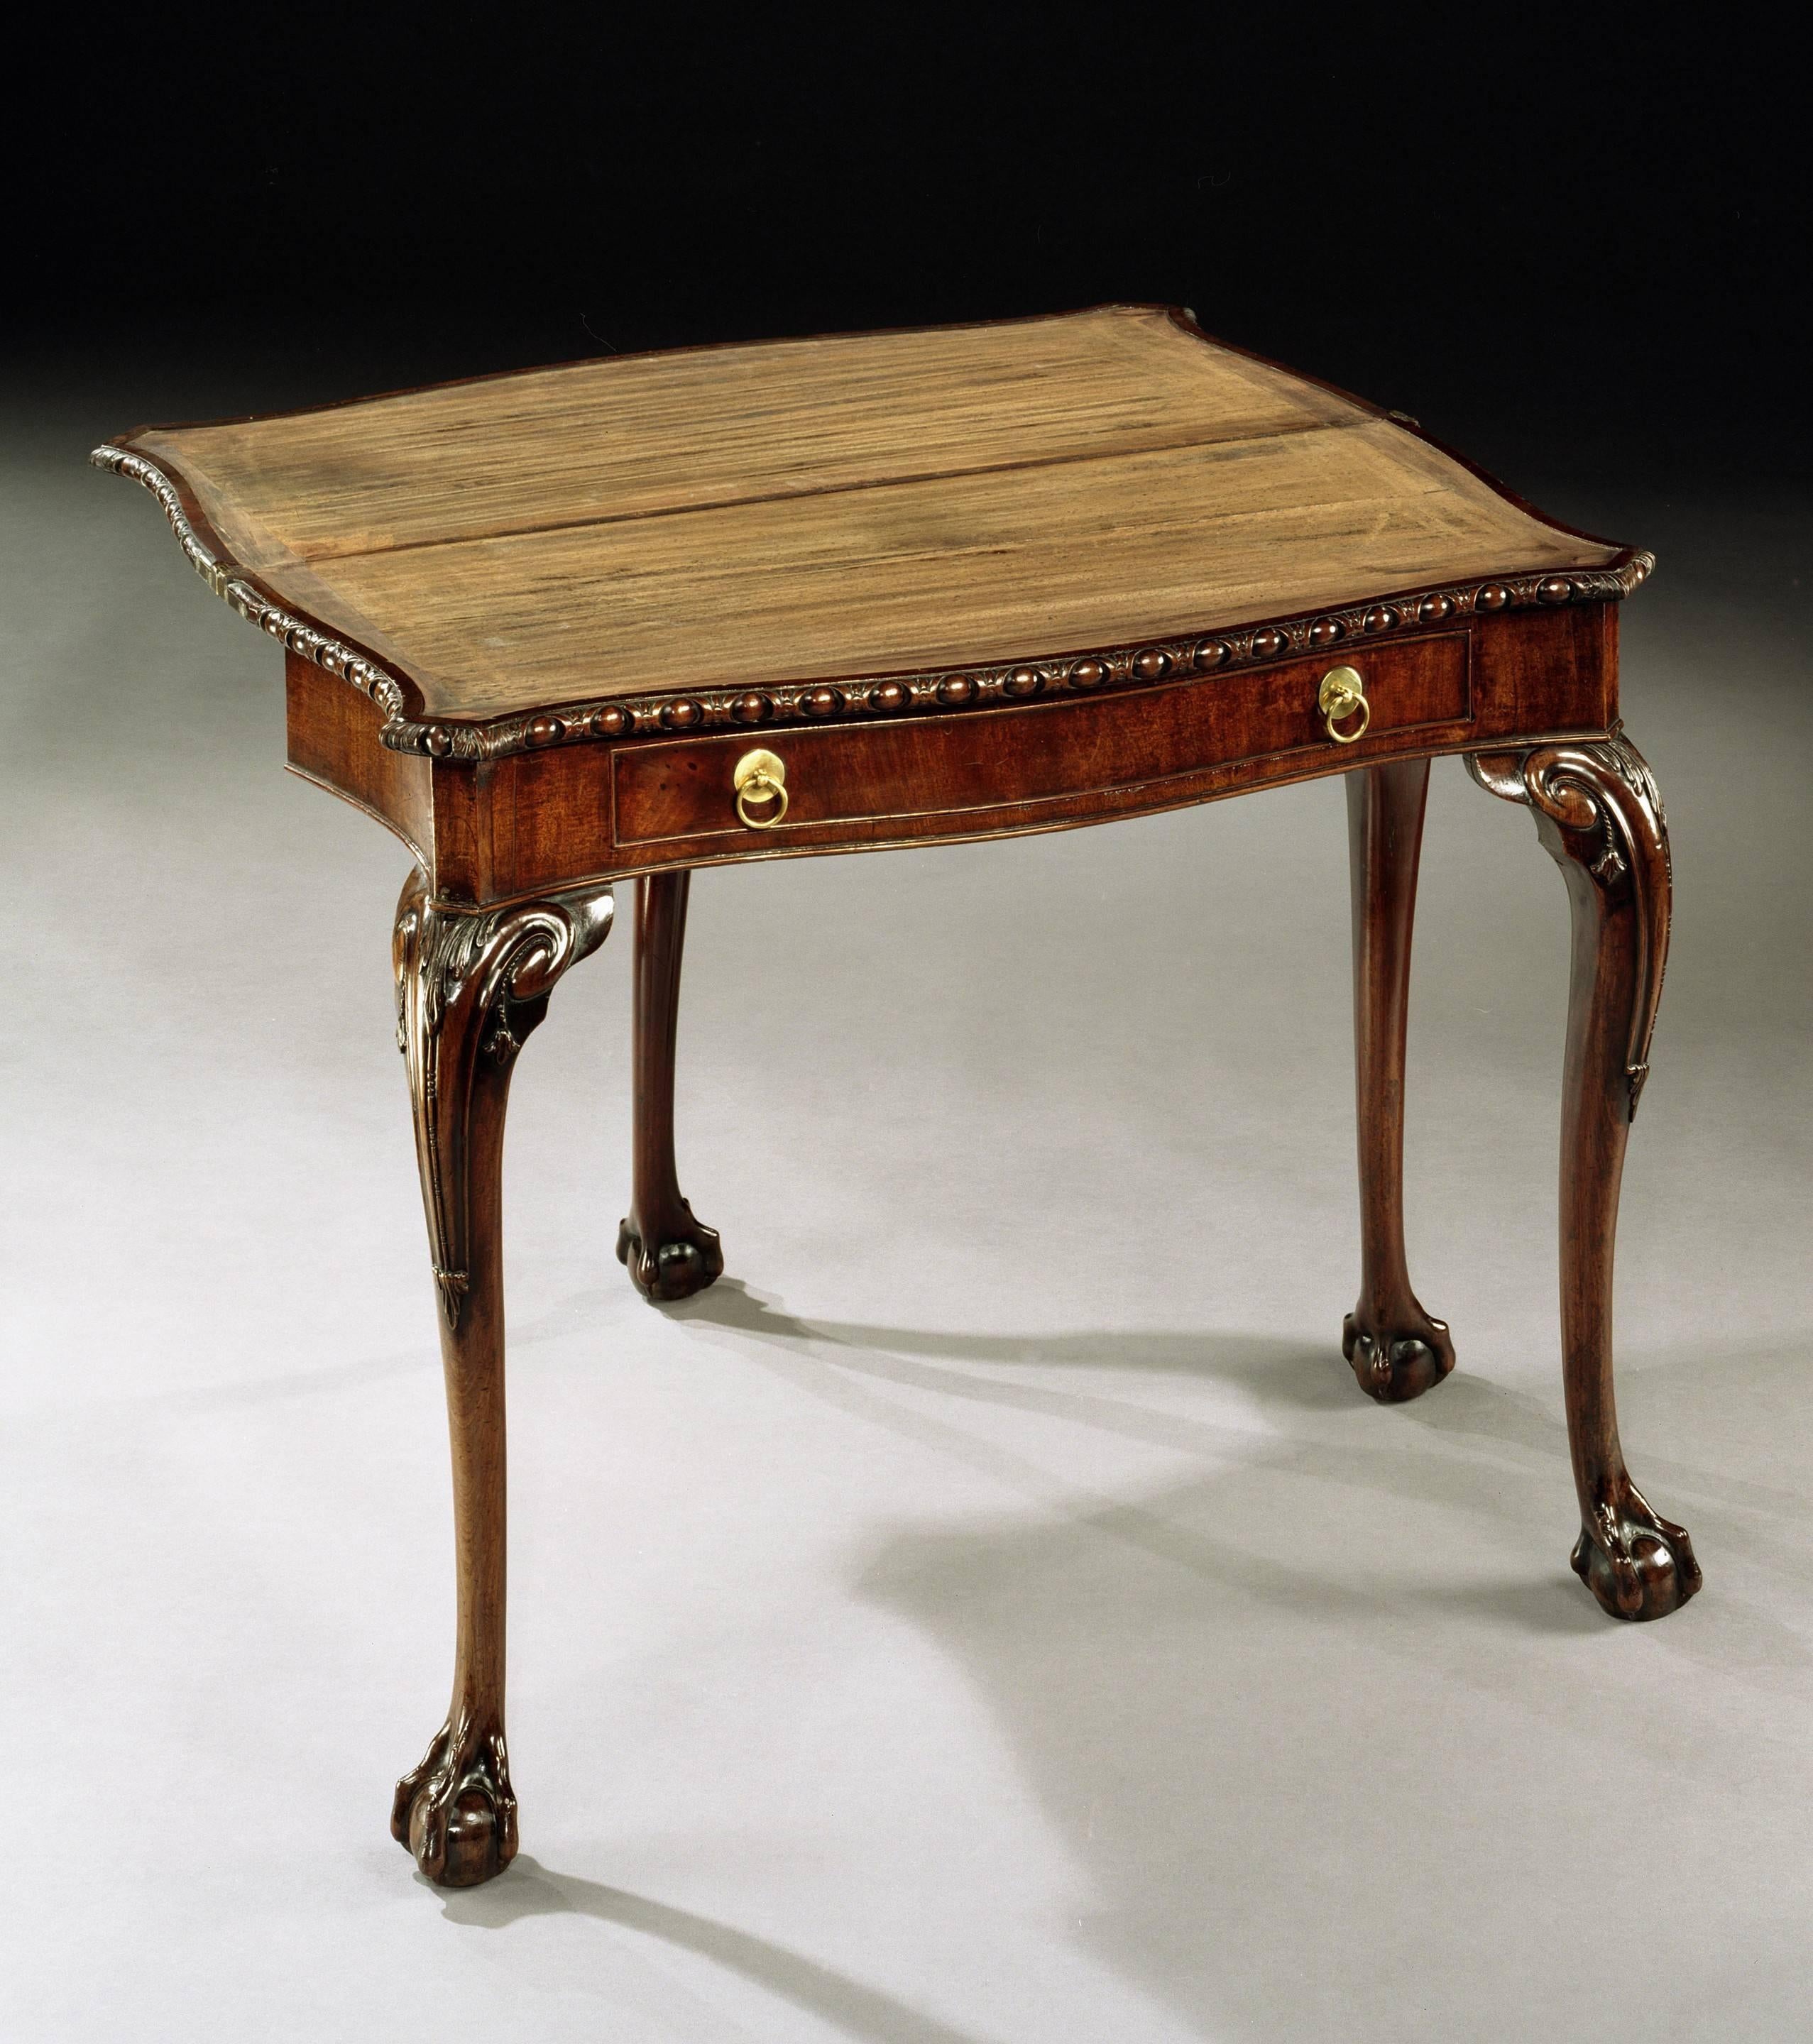 A fine mid-18th century Chippendale period carved mahogany serpentine card table, the shaped hinged top with an egg and dart edge opening to reveal a baize-lined interior with a gate-leg action above a single frieze drawer with brass ring handles,